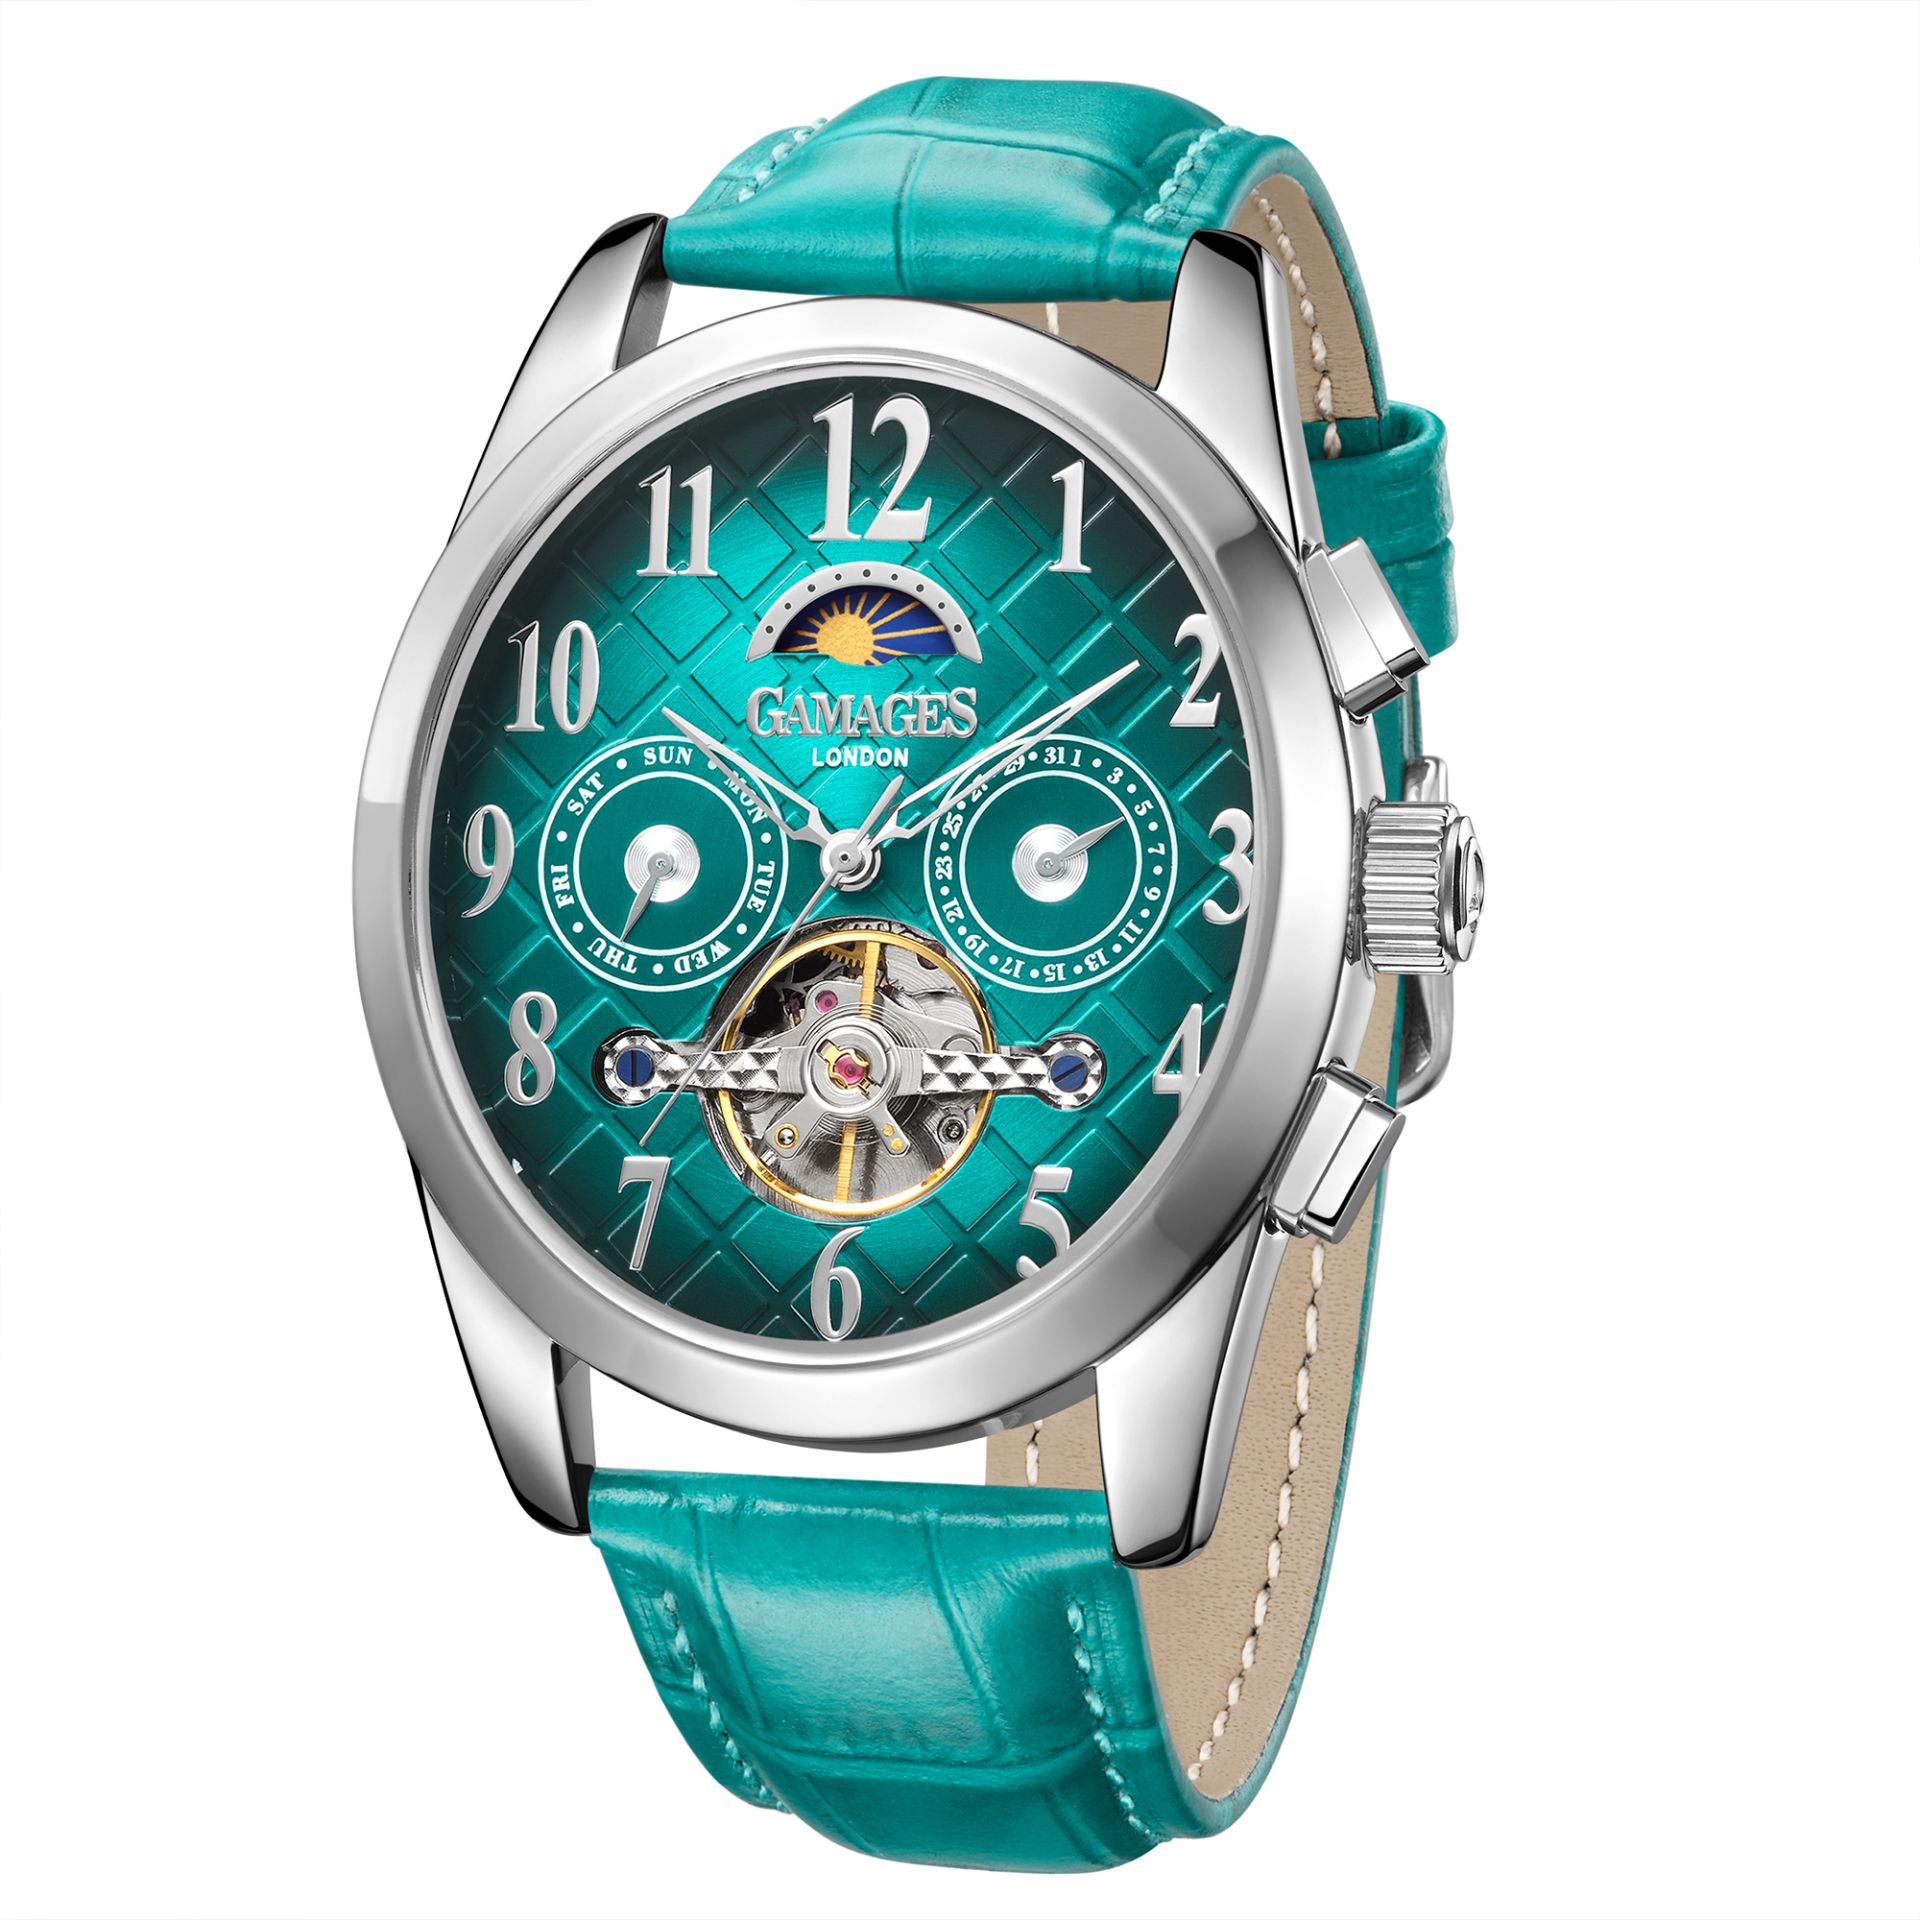 Gamages of London Hand Assembled Muse Automatic Silver Teal - 5 Year Warranty & Free Delivery - Image 4 of 5